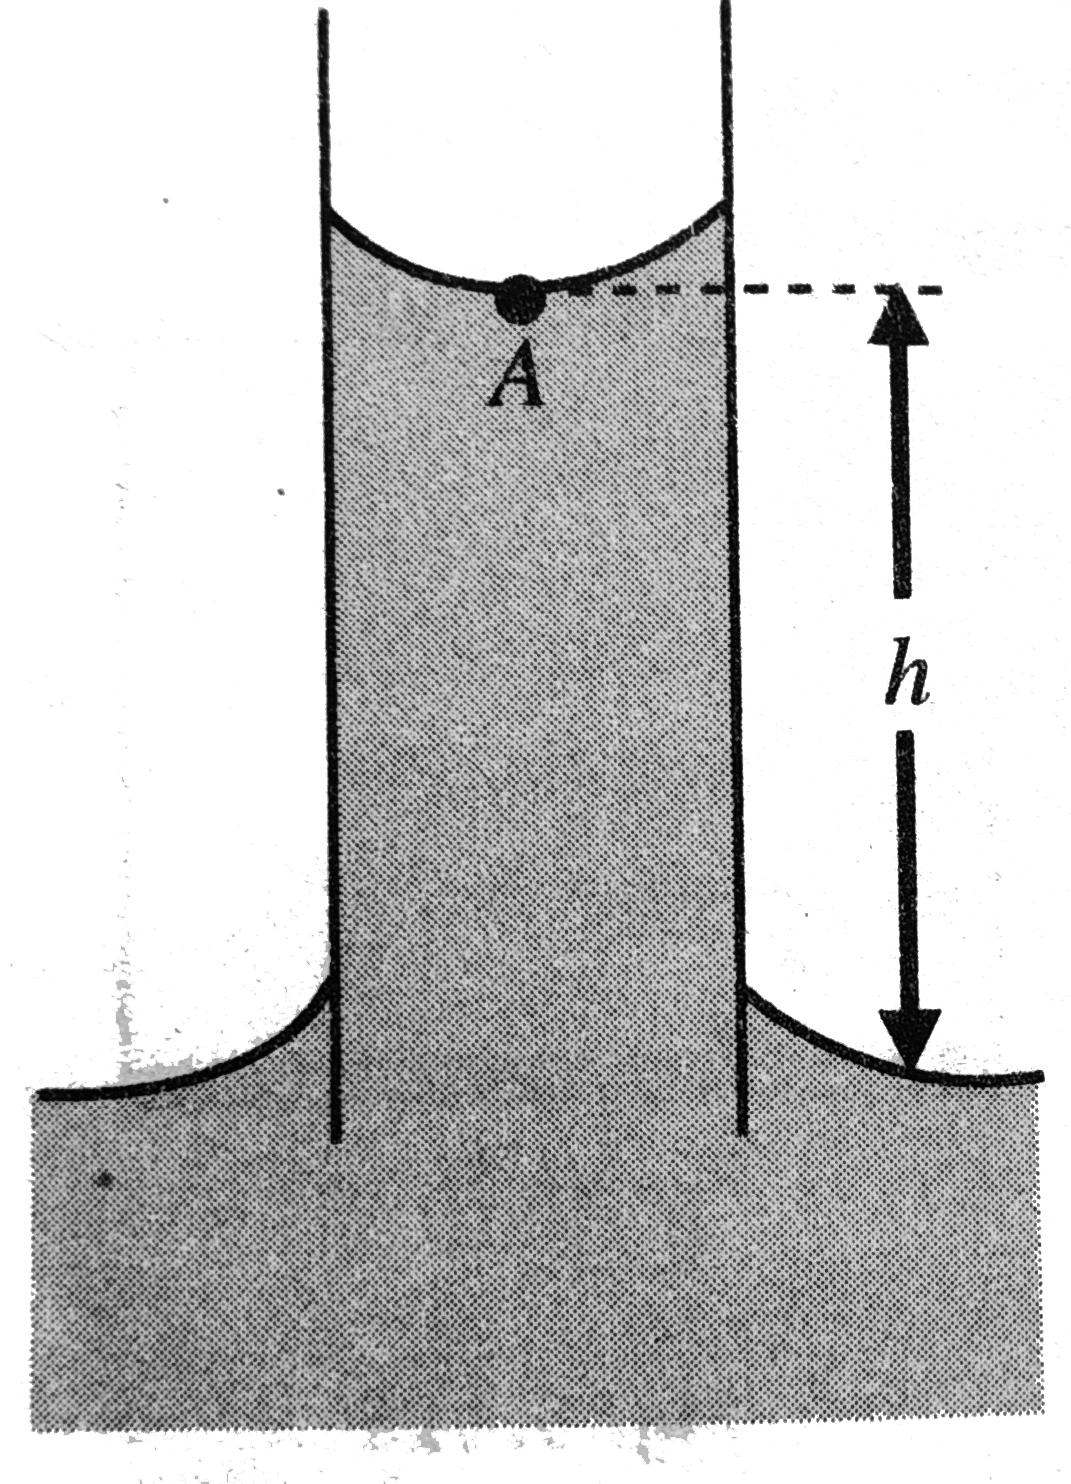 Figure shows a capillary tube of radius r dipped into The atmospheric pressure is P(0) and the capillary rise of water is h. s is the surface tension for water-glass.      Initially, h = 10 cm. If the capillary tube is now incline at 45^@, the length of water rising in the tube will be